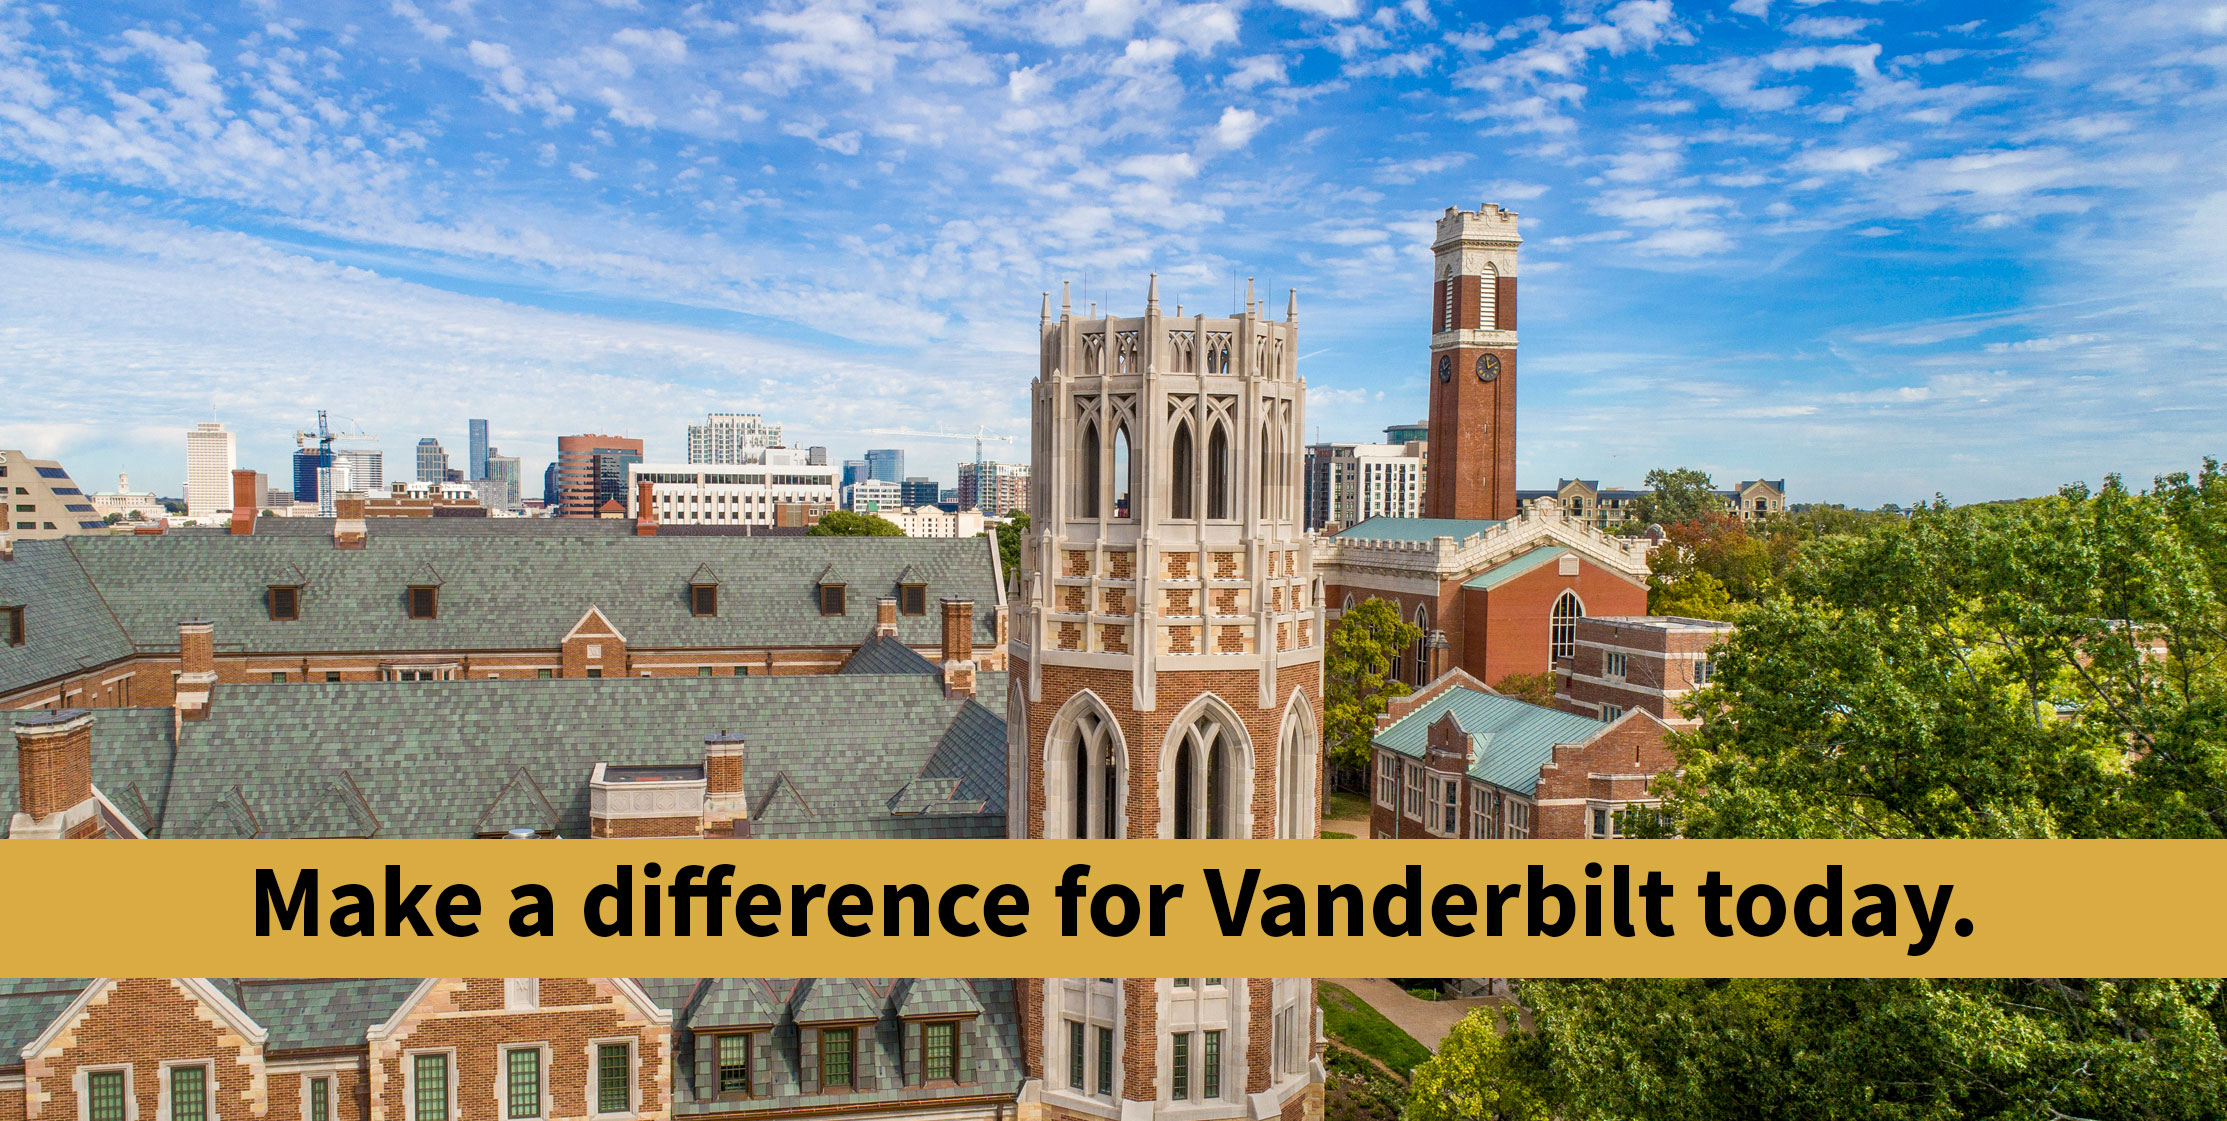 Make a difference for Vanderbilt today.